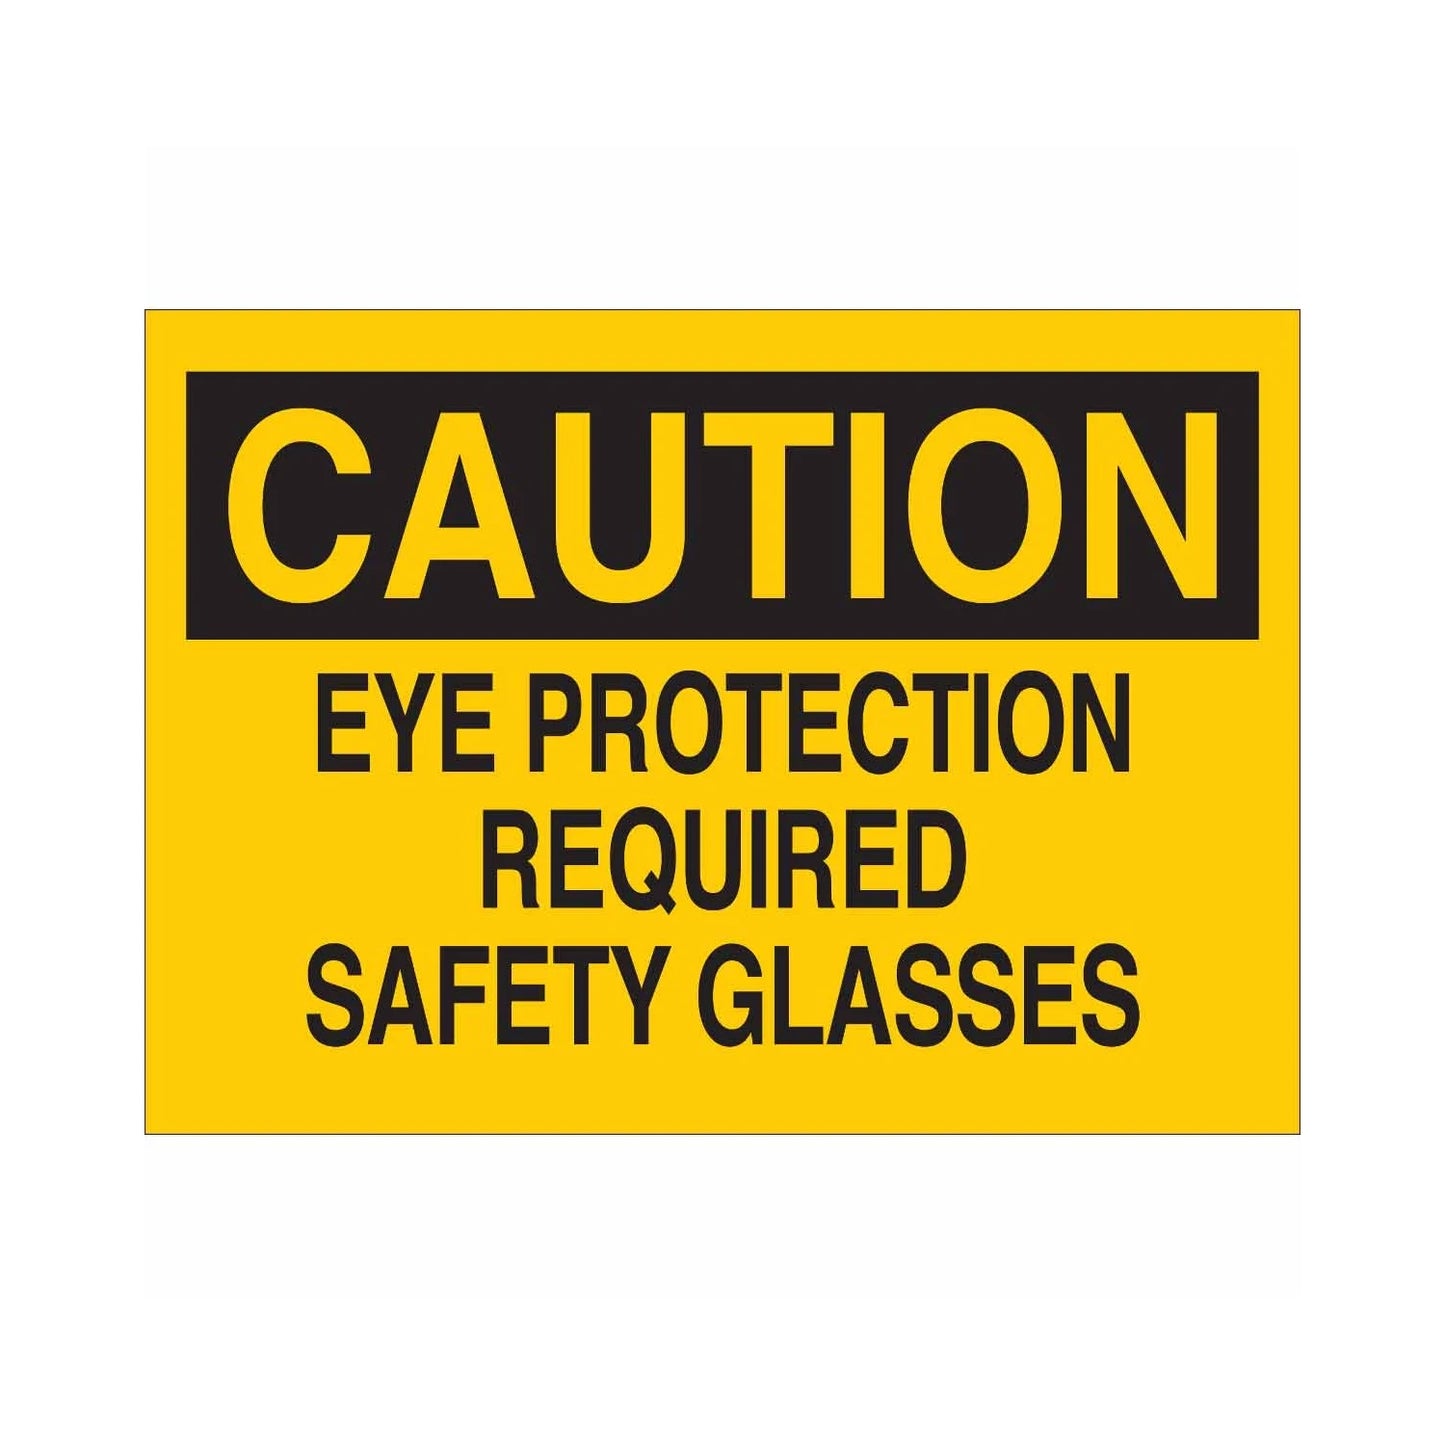 CAUTION Eye Protection Required Safety Glasses Sign